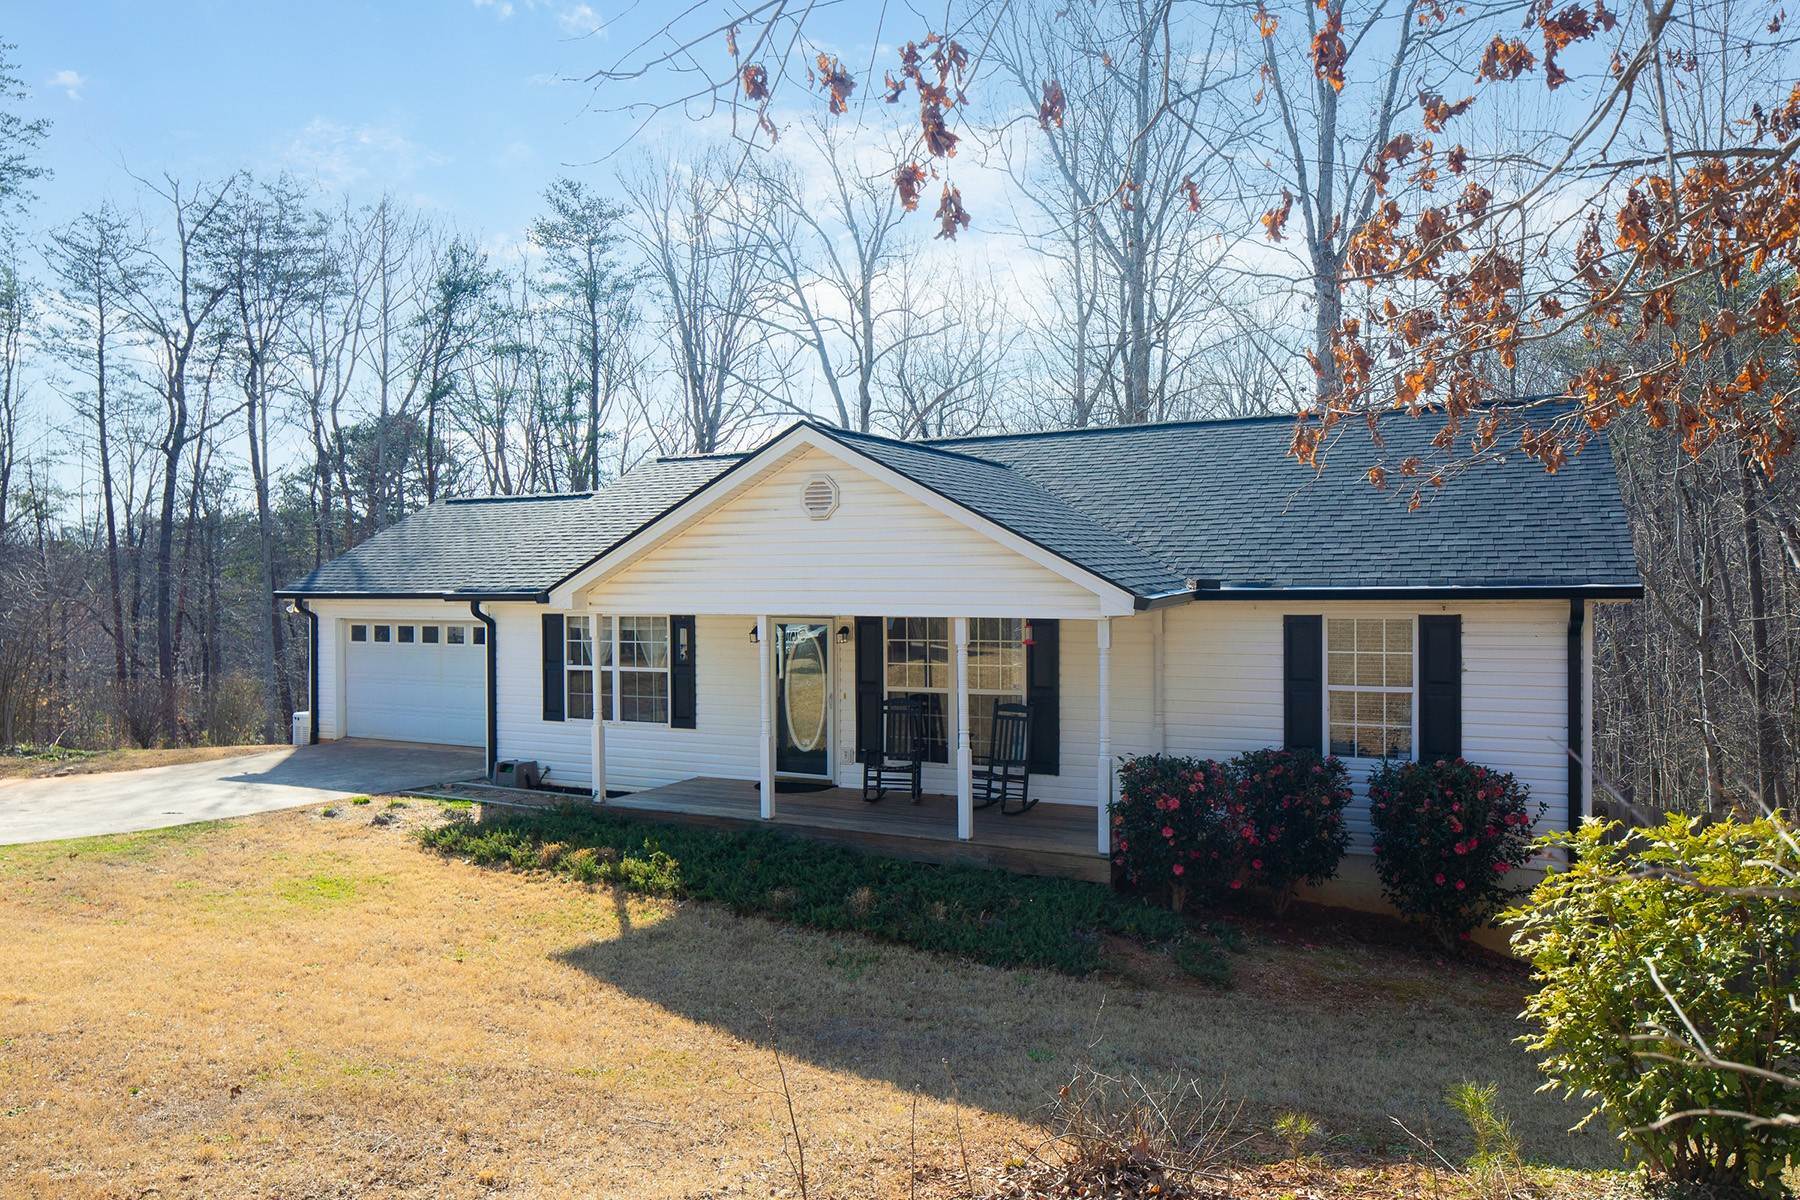 Property for Sale at Move-In Ready Ranch with Finished Basement in Dalonega 124 Georgia Avenue Dahlonega, Georgia 30533 United States